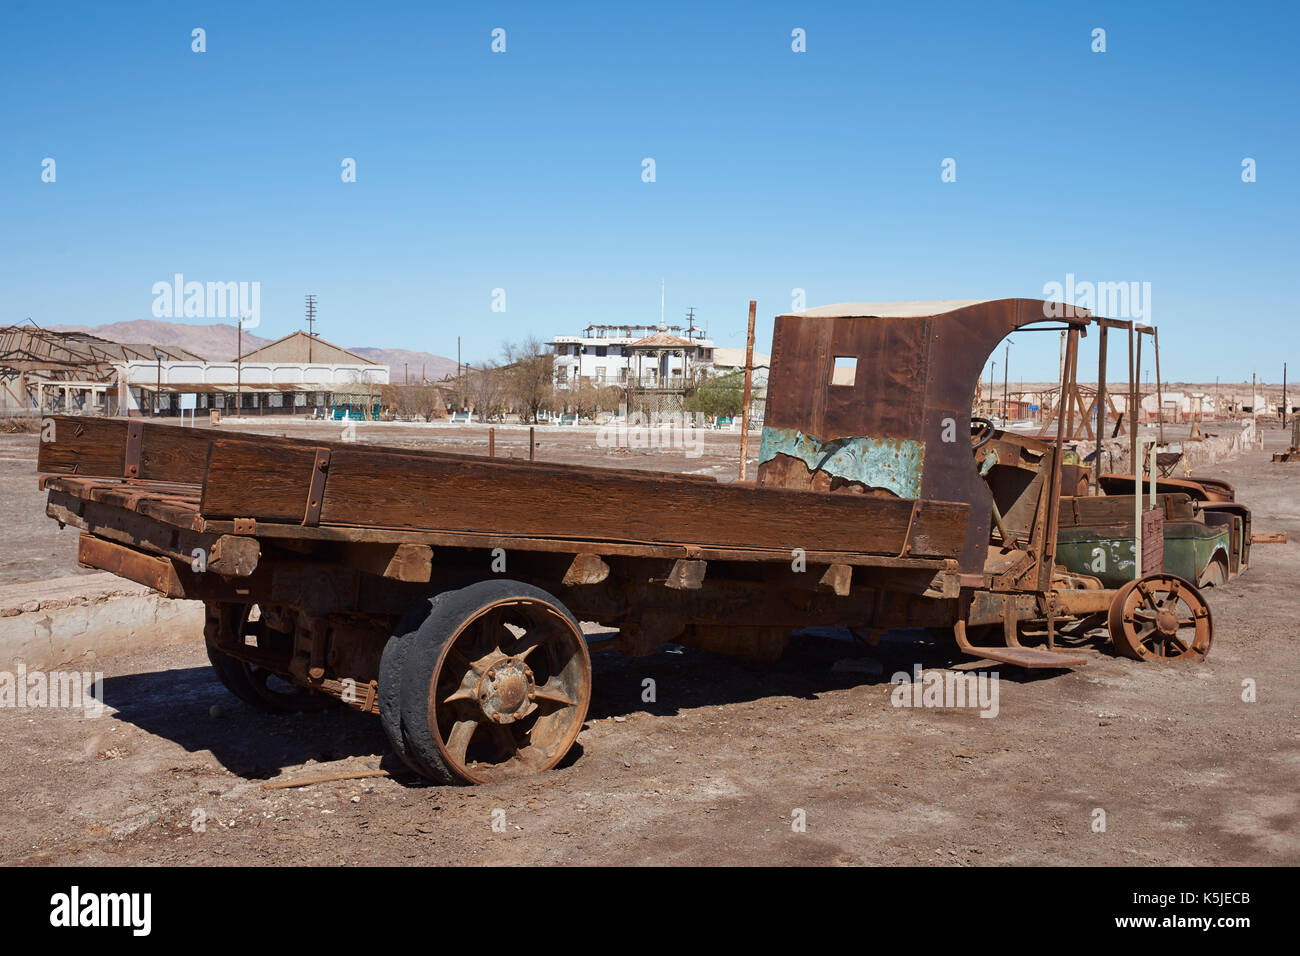 Abandoned vehicle in the derelict nitrate mining town of Chacabuco in the Atacama Desert of northern Chile Stock Photo